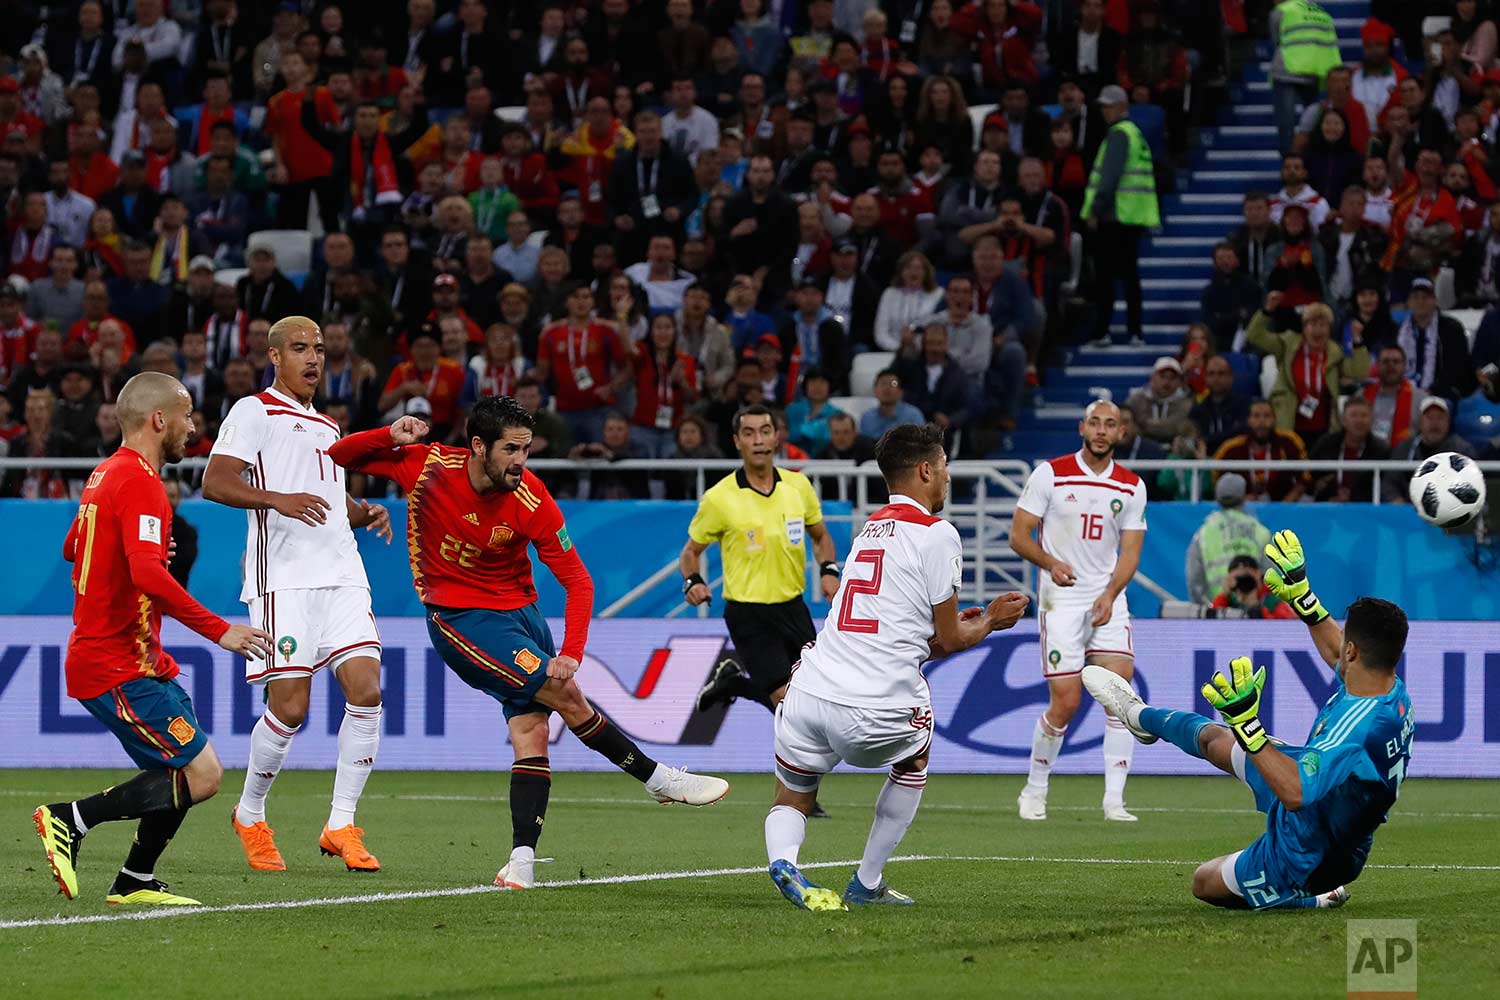  Spain's Isco, 3rd left, scores his side's opening goal during the group B match between Spain and Morocco at the 2018 soccer World Cup at the Kaliningrad Stadium in Kaliningrad, Russia, Monday, June 25, 2018. (AP Photo/Manu Fernandez) 